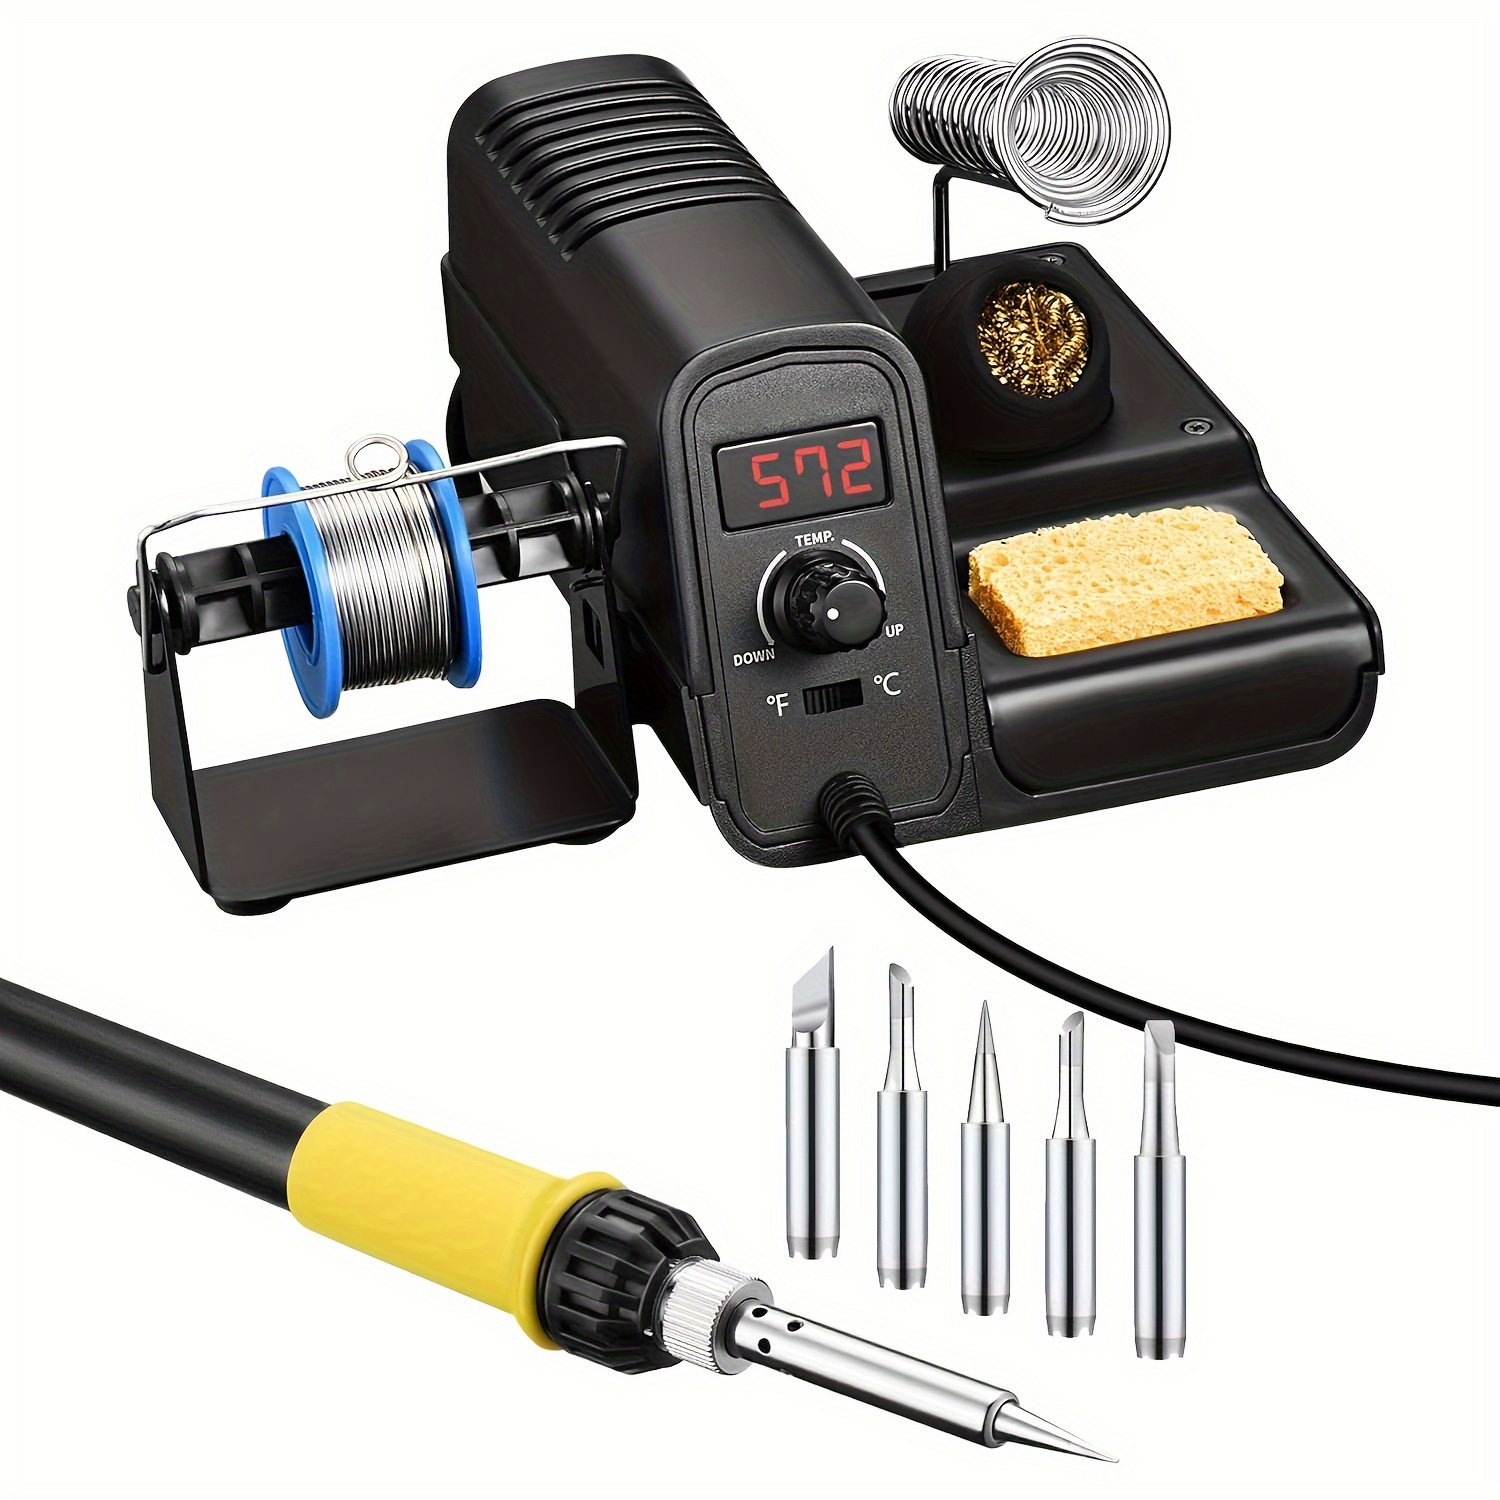 

Soldering Iron Station Kit With Lead-free Solder Wire Soldering Tips Tip Cleaner, Desoldering Pump With Temperature Control, Fine Soldering Iron With C-f Conversion Function Sleeping Mode